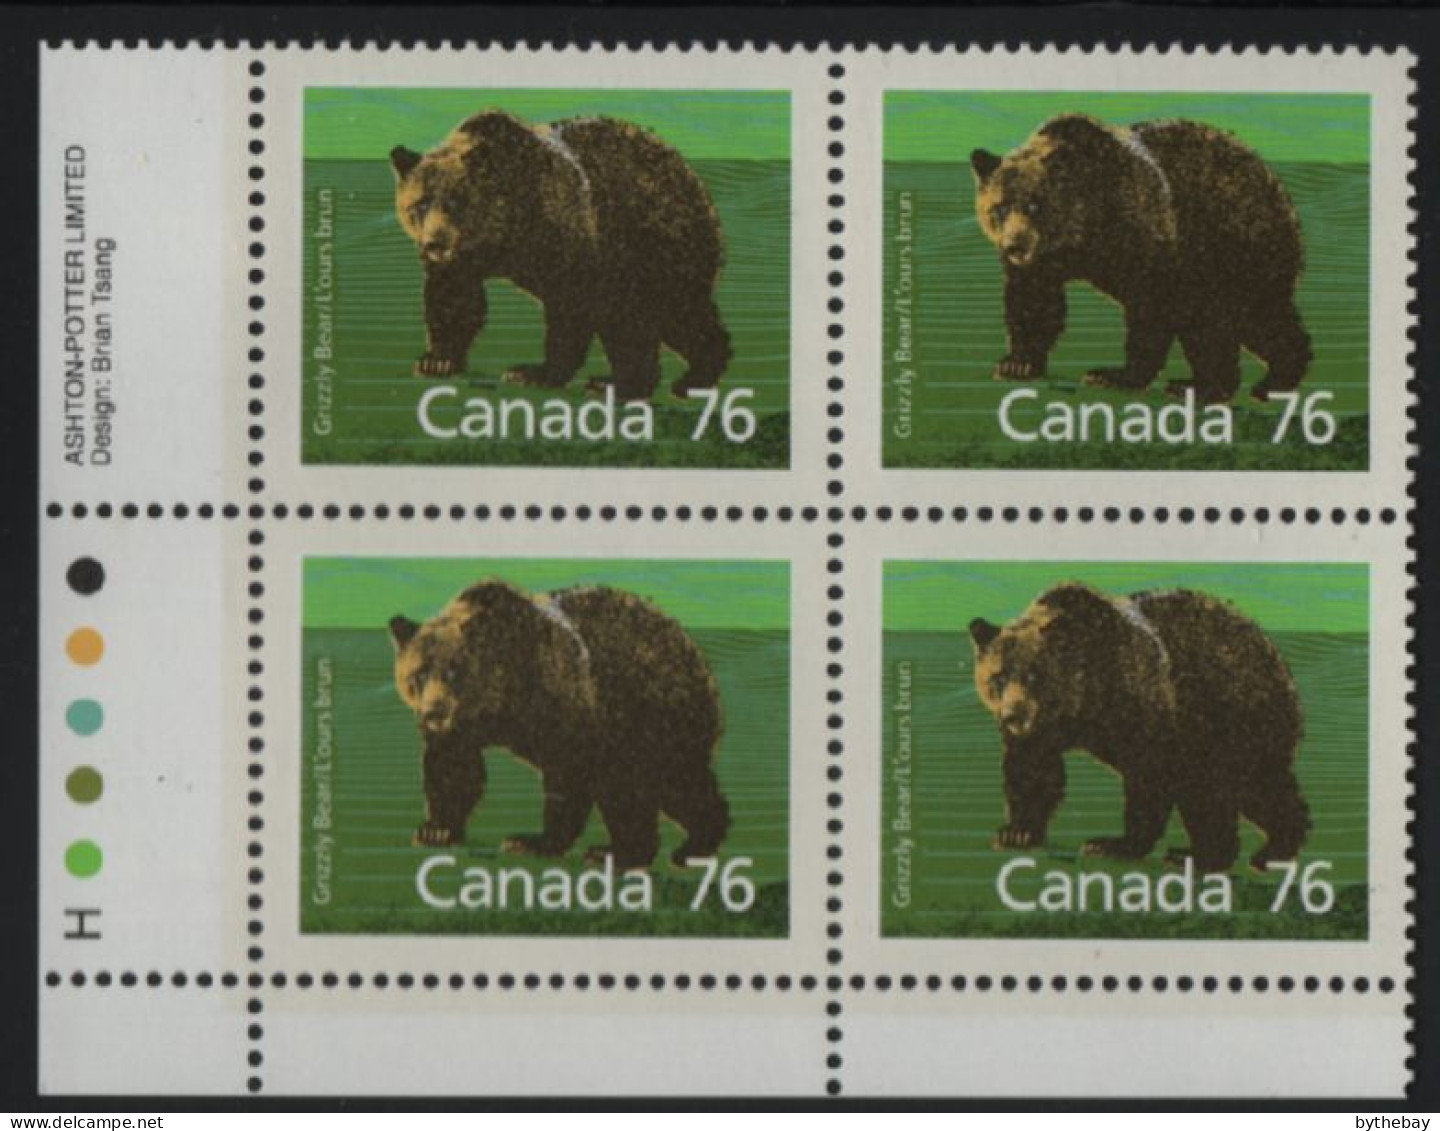 Canada 1988-92 MNH Sc 1178 76c Grizzly Bear LL Plate Block - Plate Number & Inscriptions